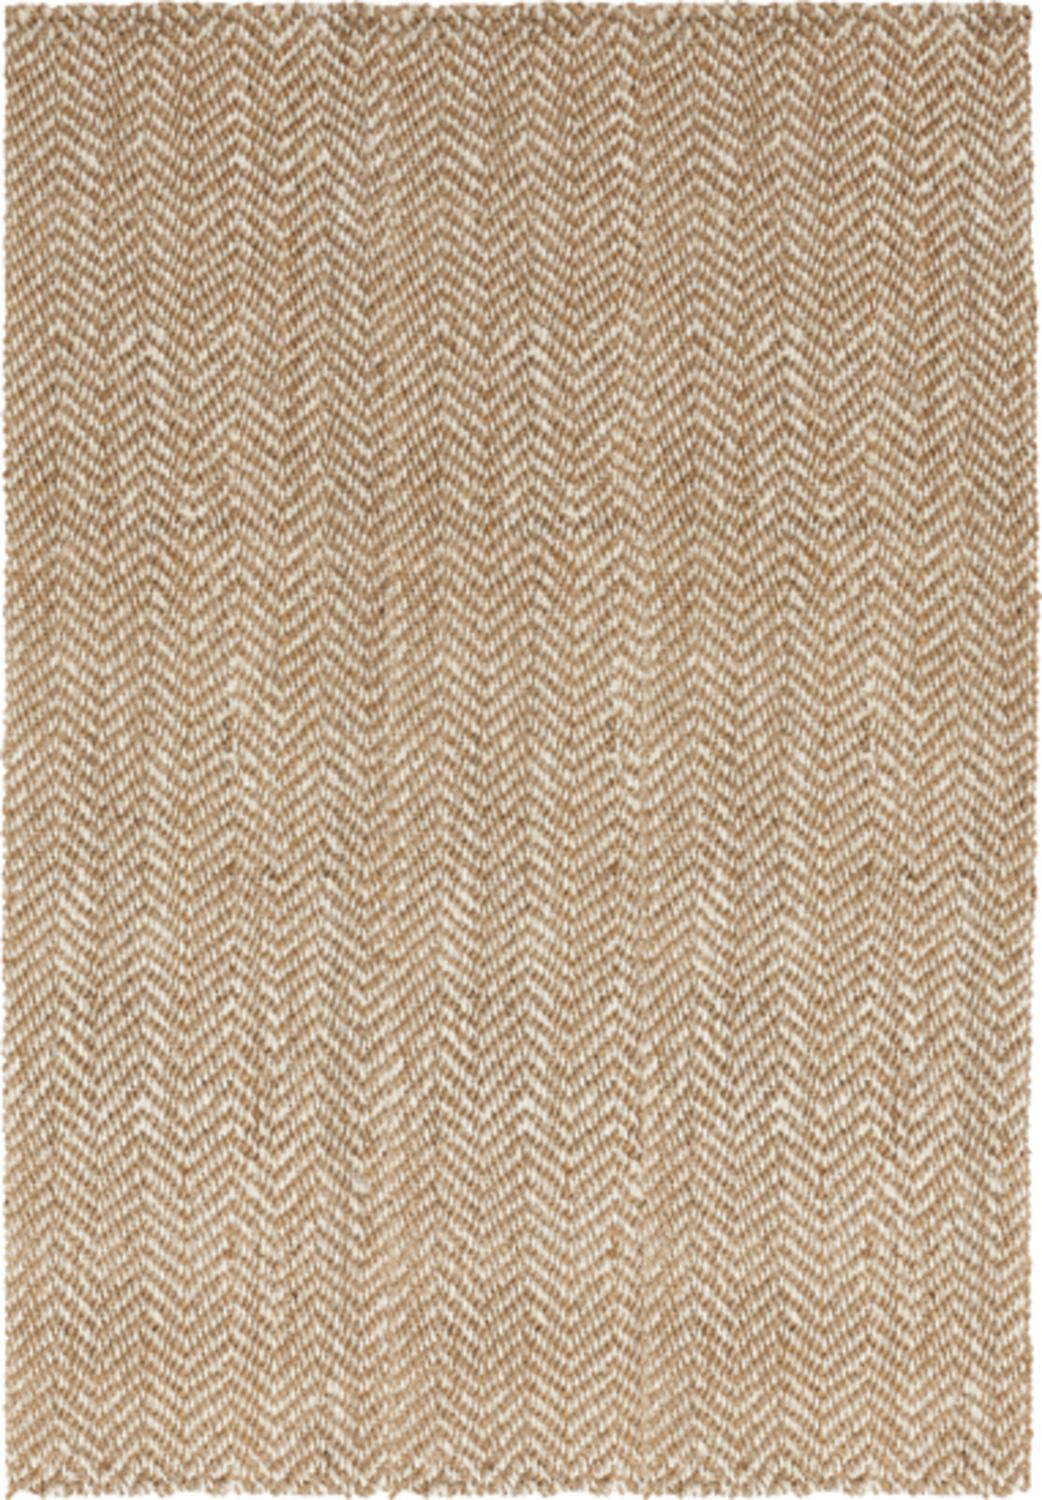 Diva At Home  3.25' x 5.25' Moroccan Chevron Prune and Ivory Hand Woven Jute Area Throw Rug